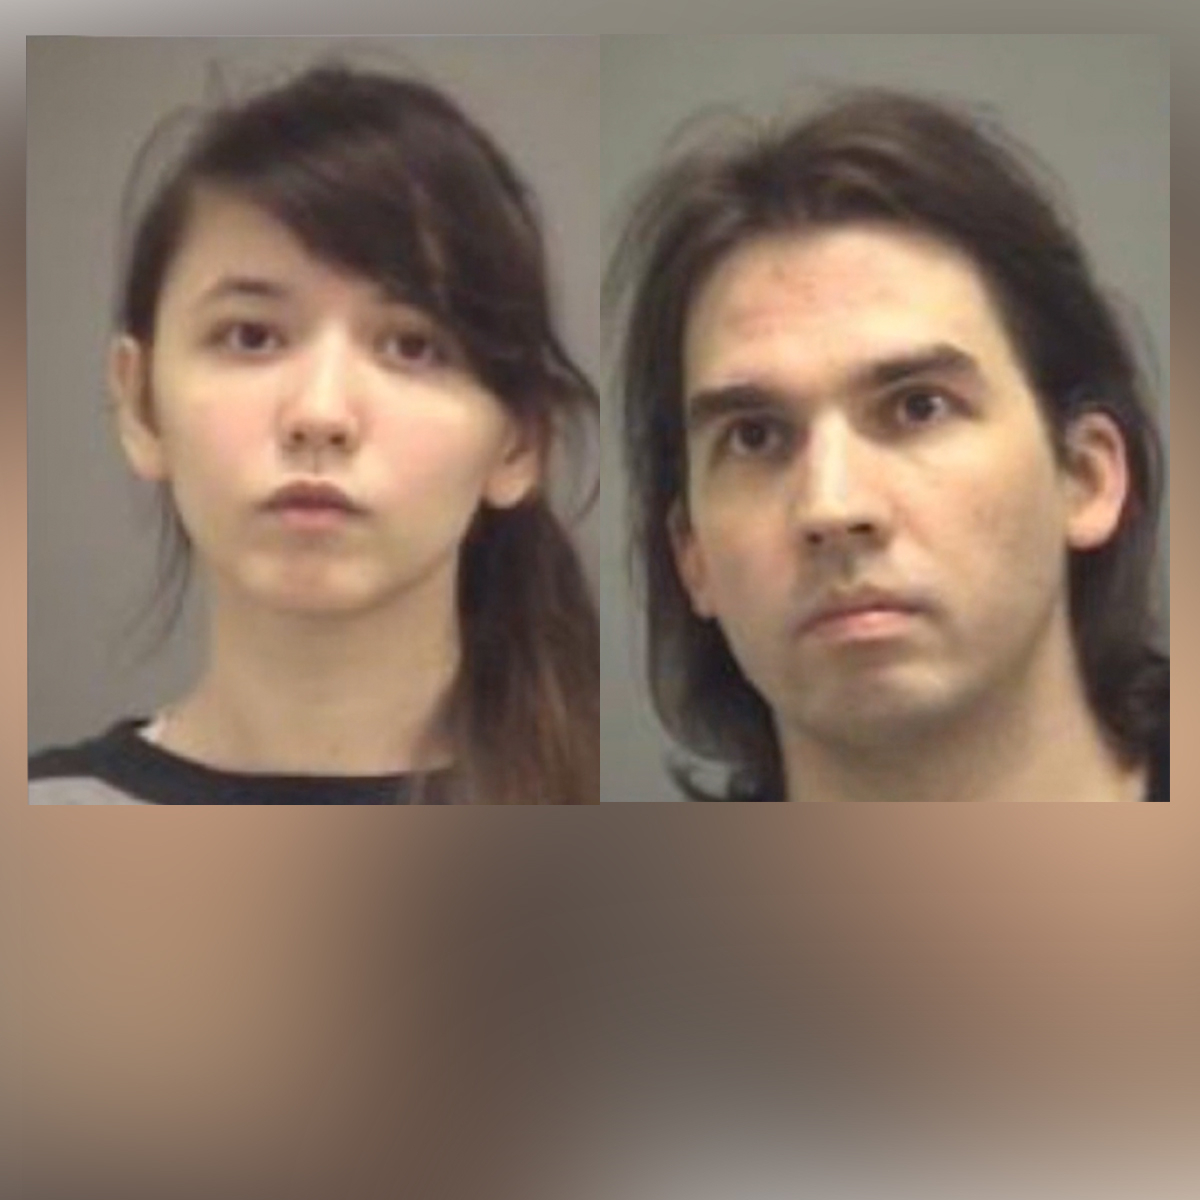 Daddy Daughter Real Mms - Katie Pladl and the Father-Daughter Incest Case That Ended in Murder